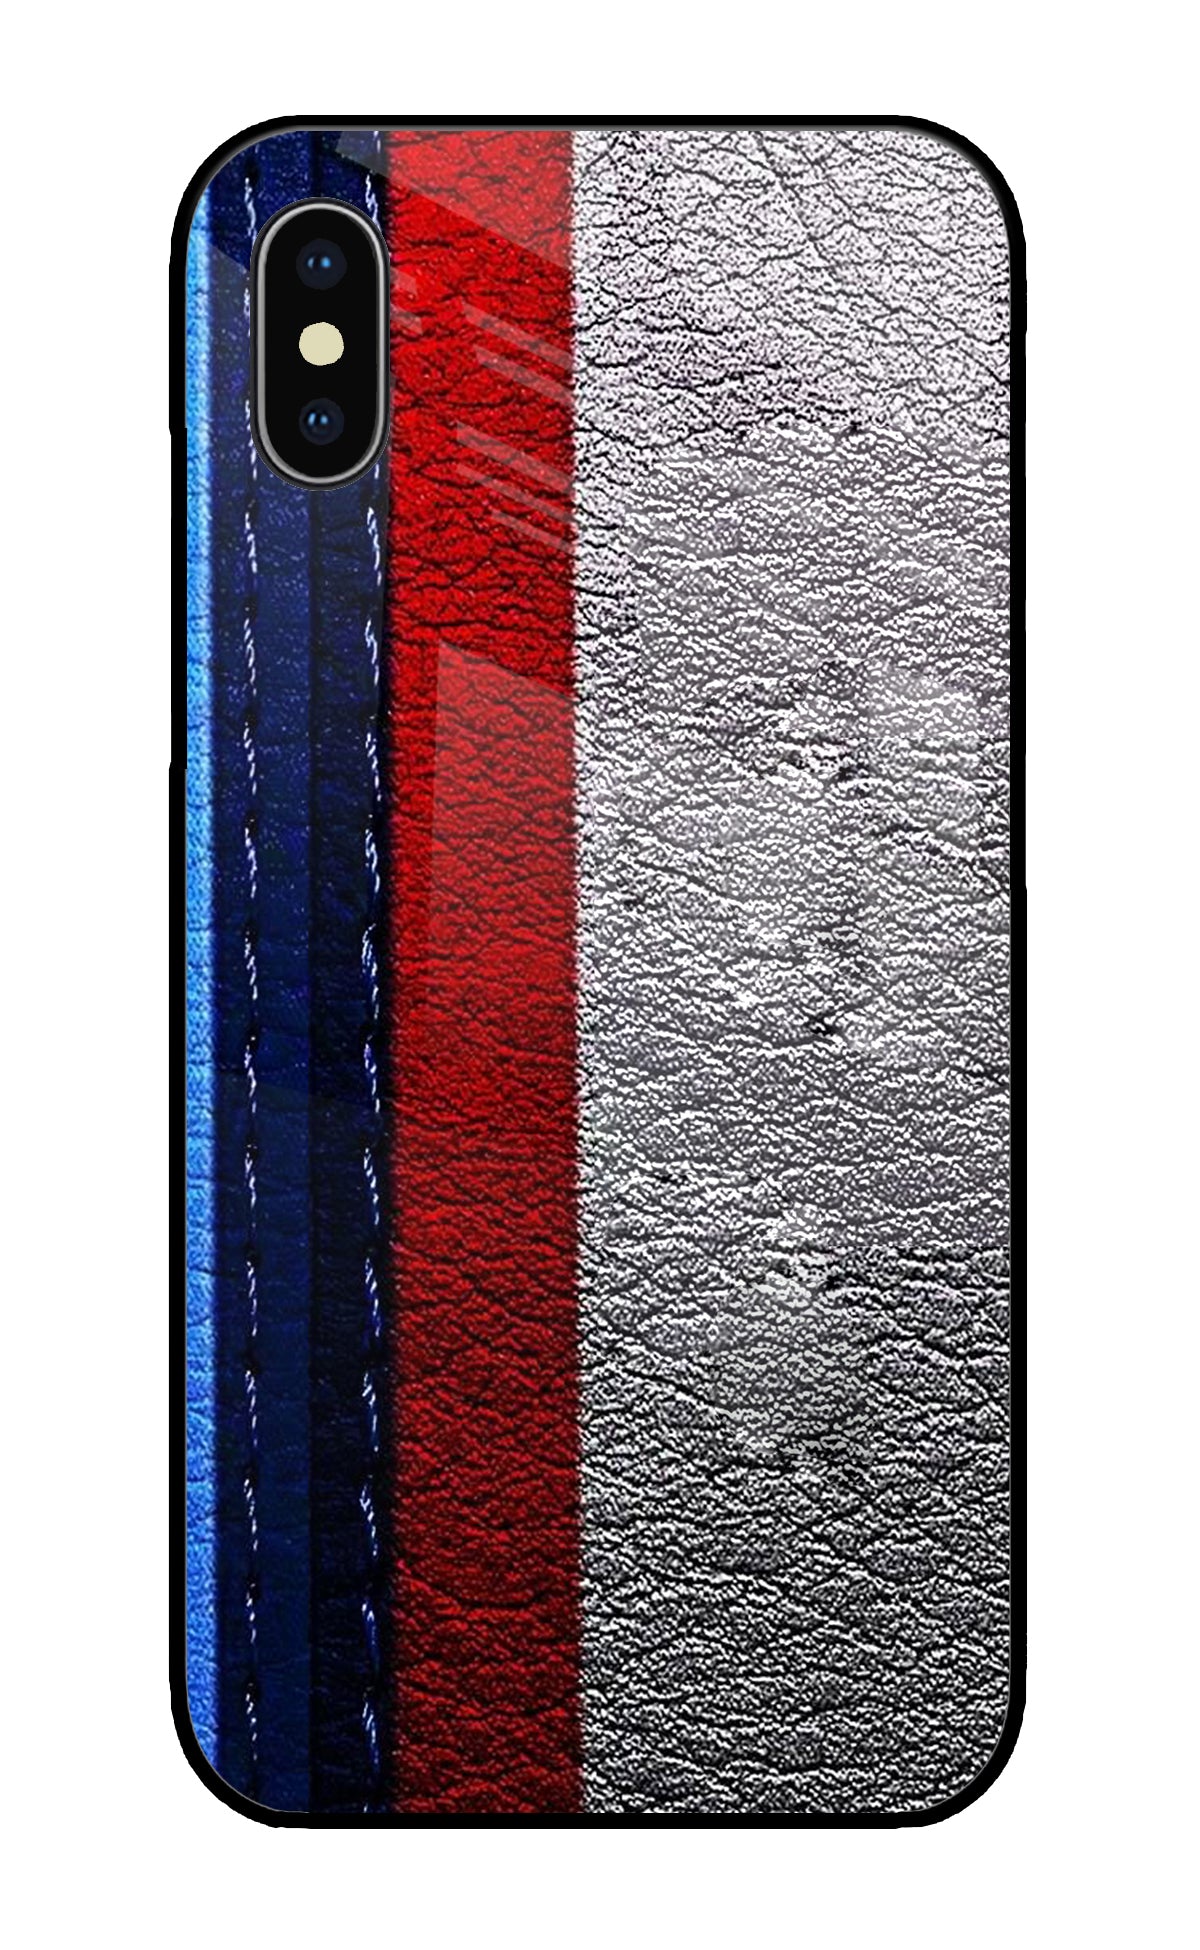 BMW Stripes iPhone X Glass Cover